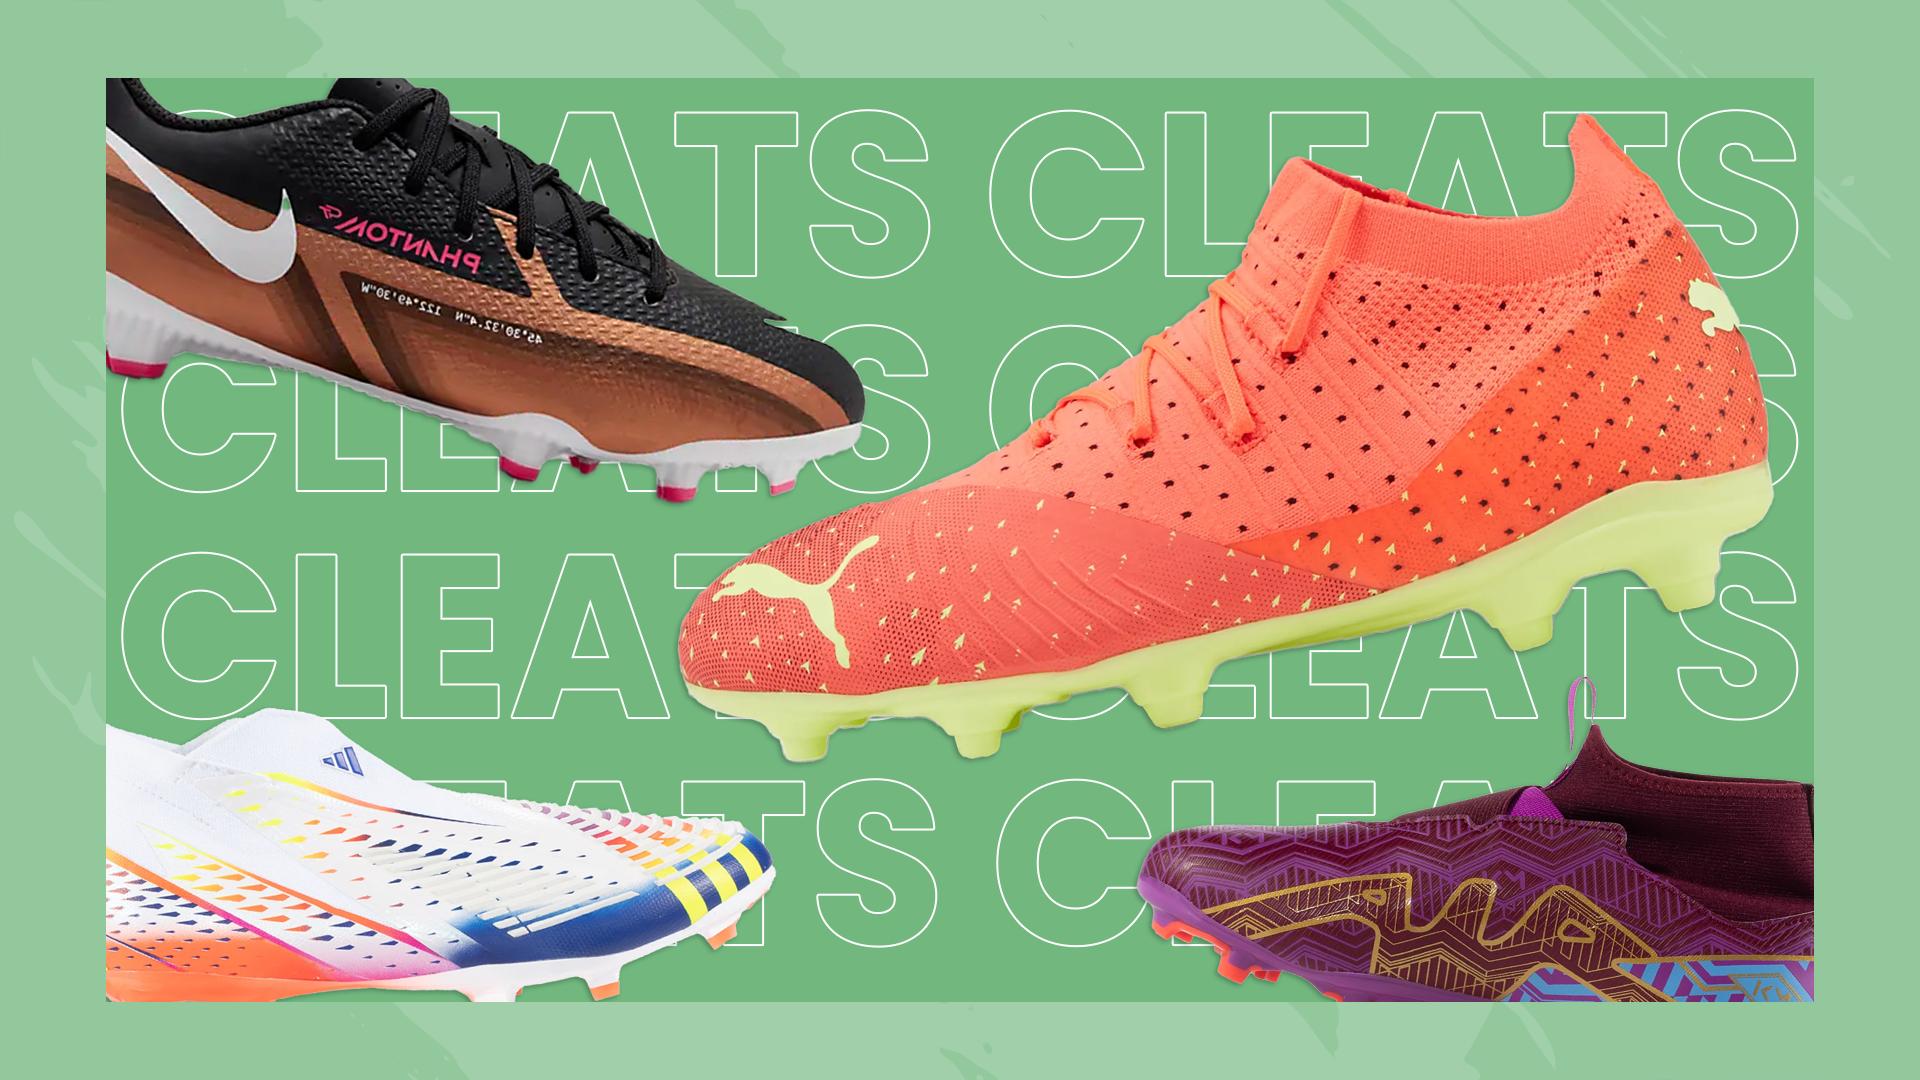 The Best Soccer Cleats for Kids: A Guide from Pesstatsdatabase